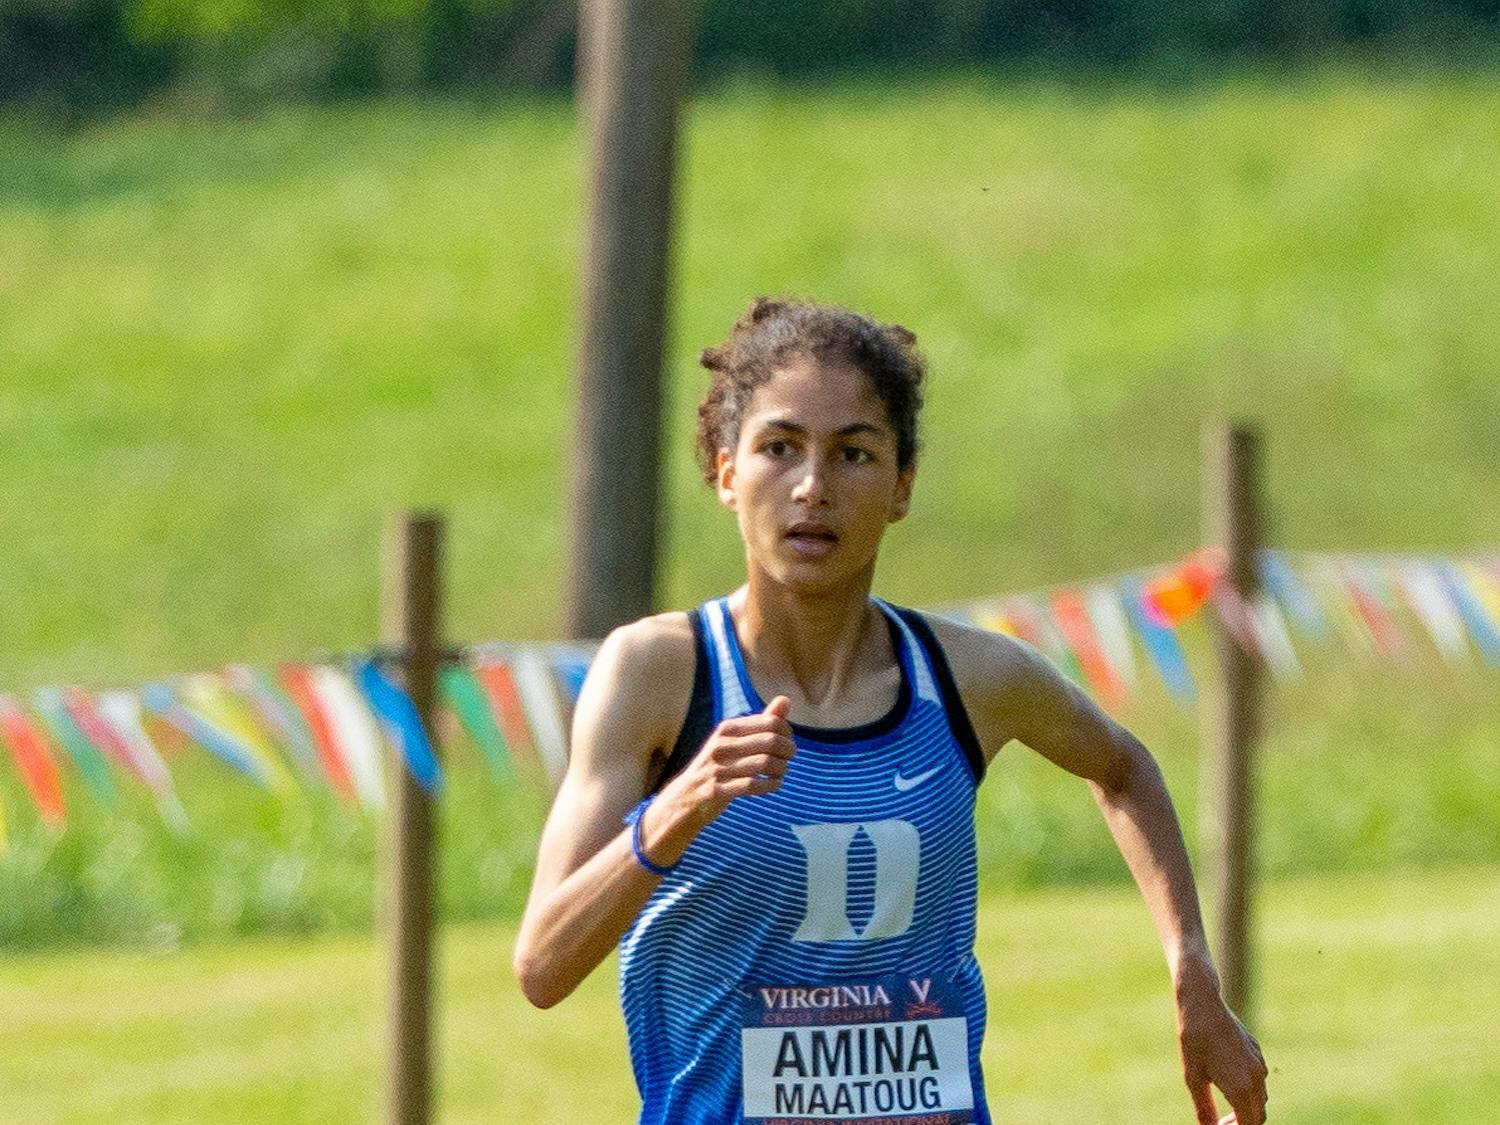 Sophomore Amina Maatoug set the Duke women's track all-time record for the mile at 4:32.54 seconds at the Camel City Invitational.